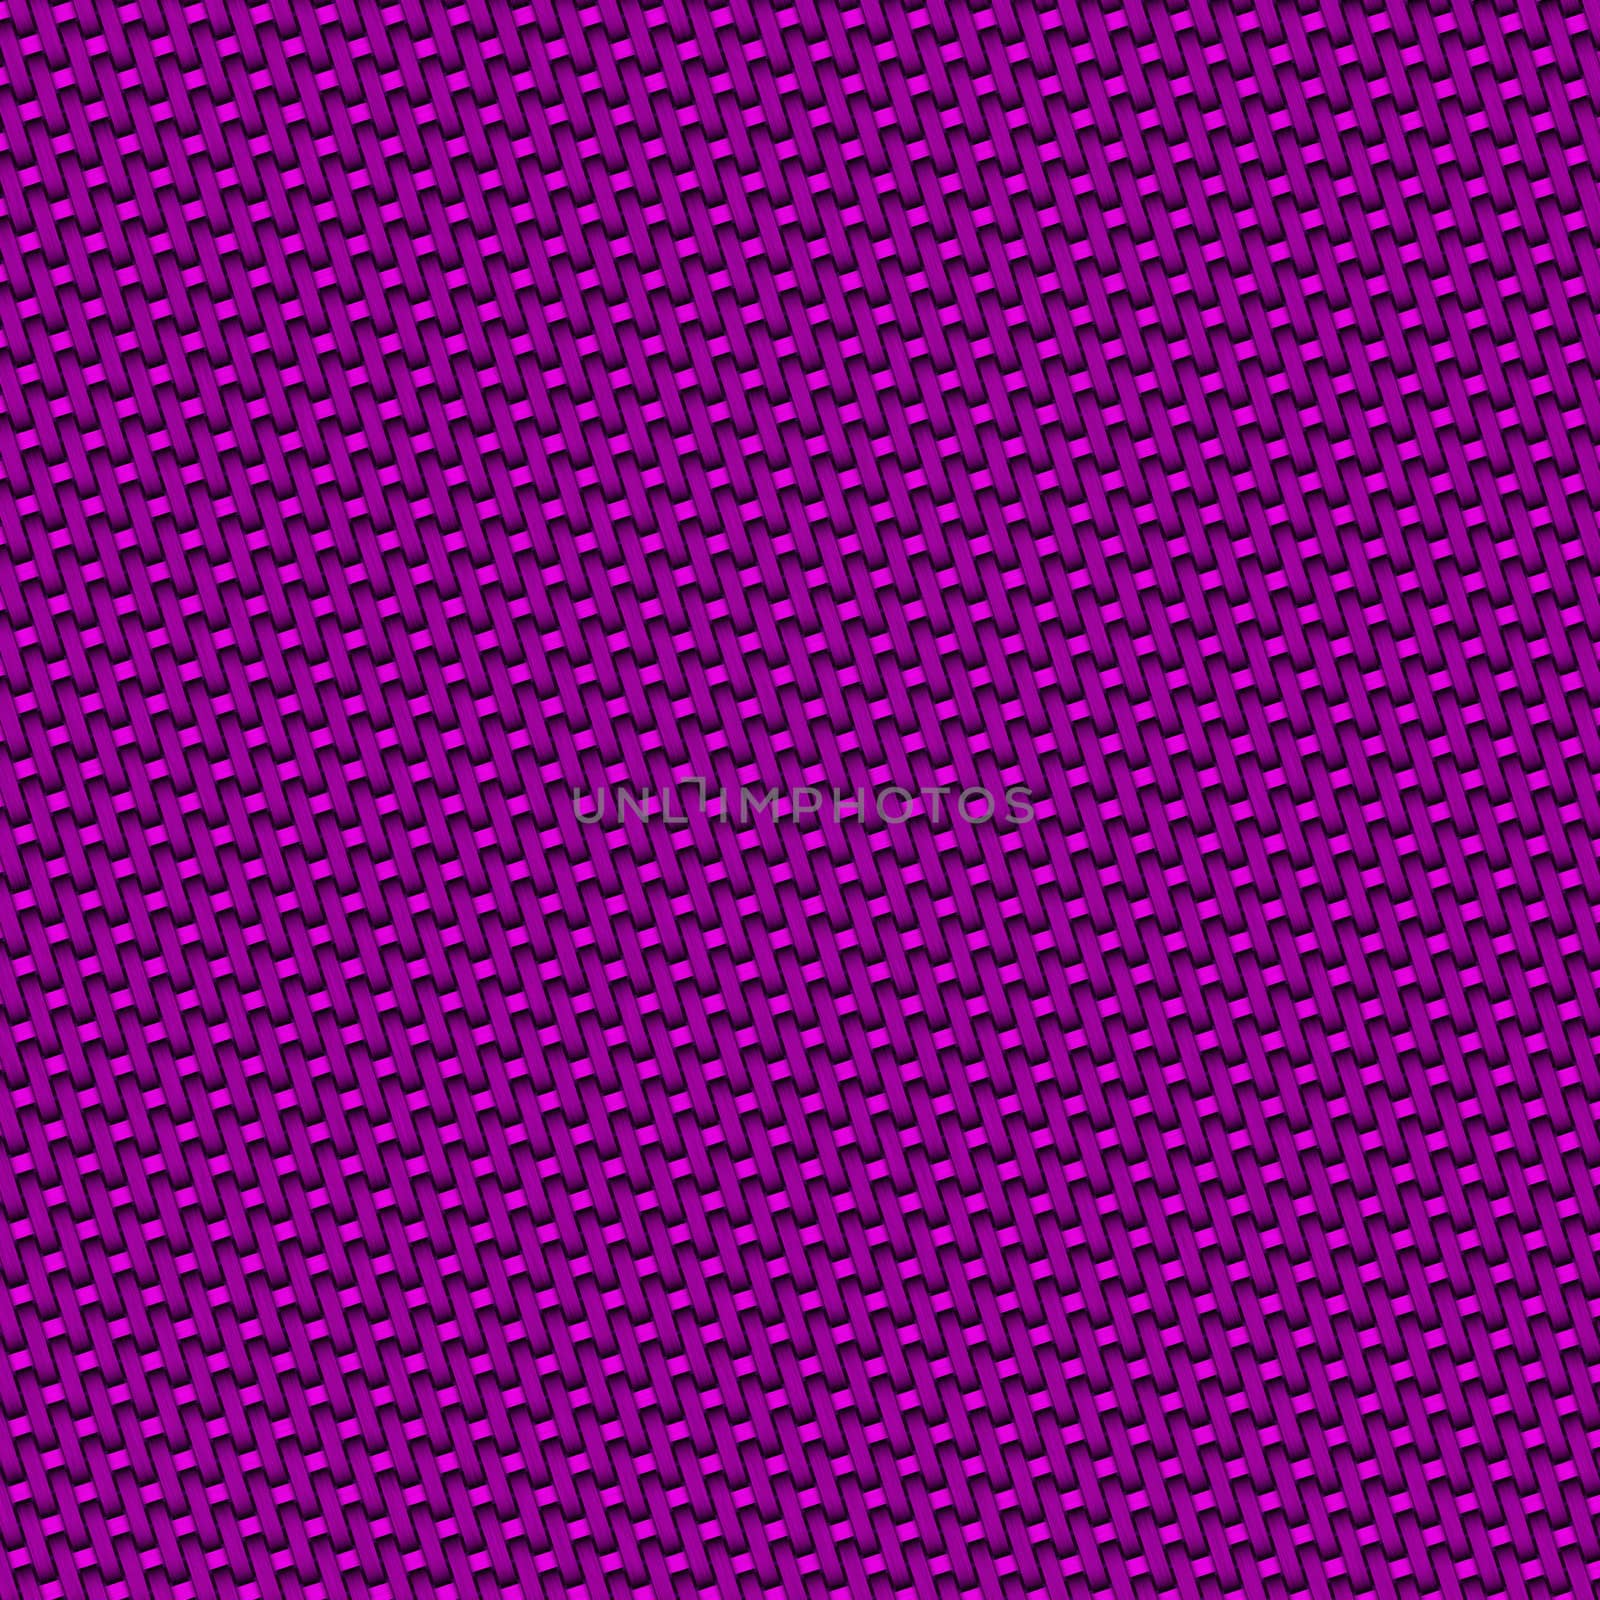 Purple knitted cotton fabric texture background.